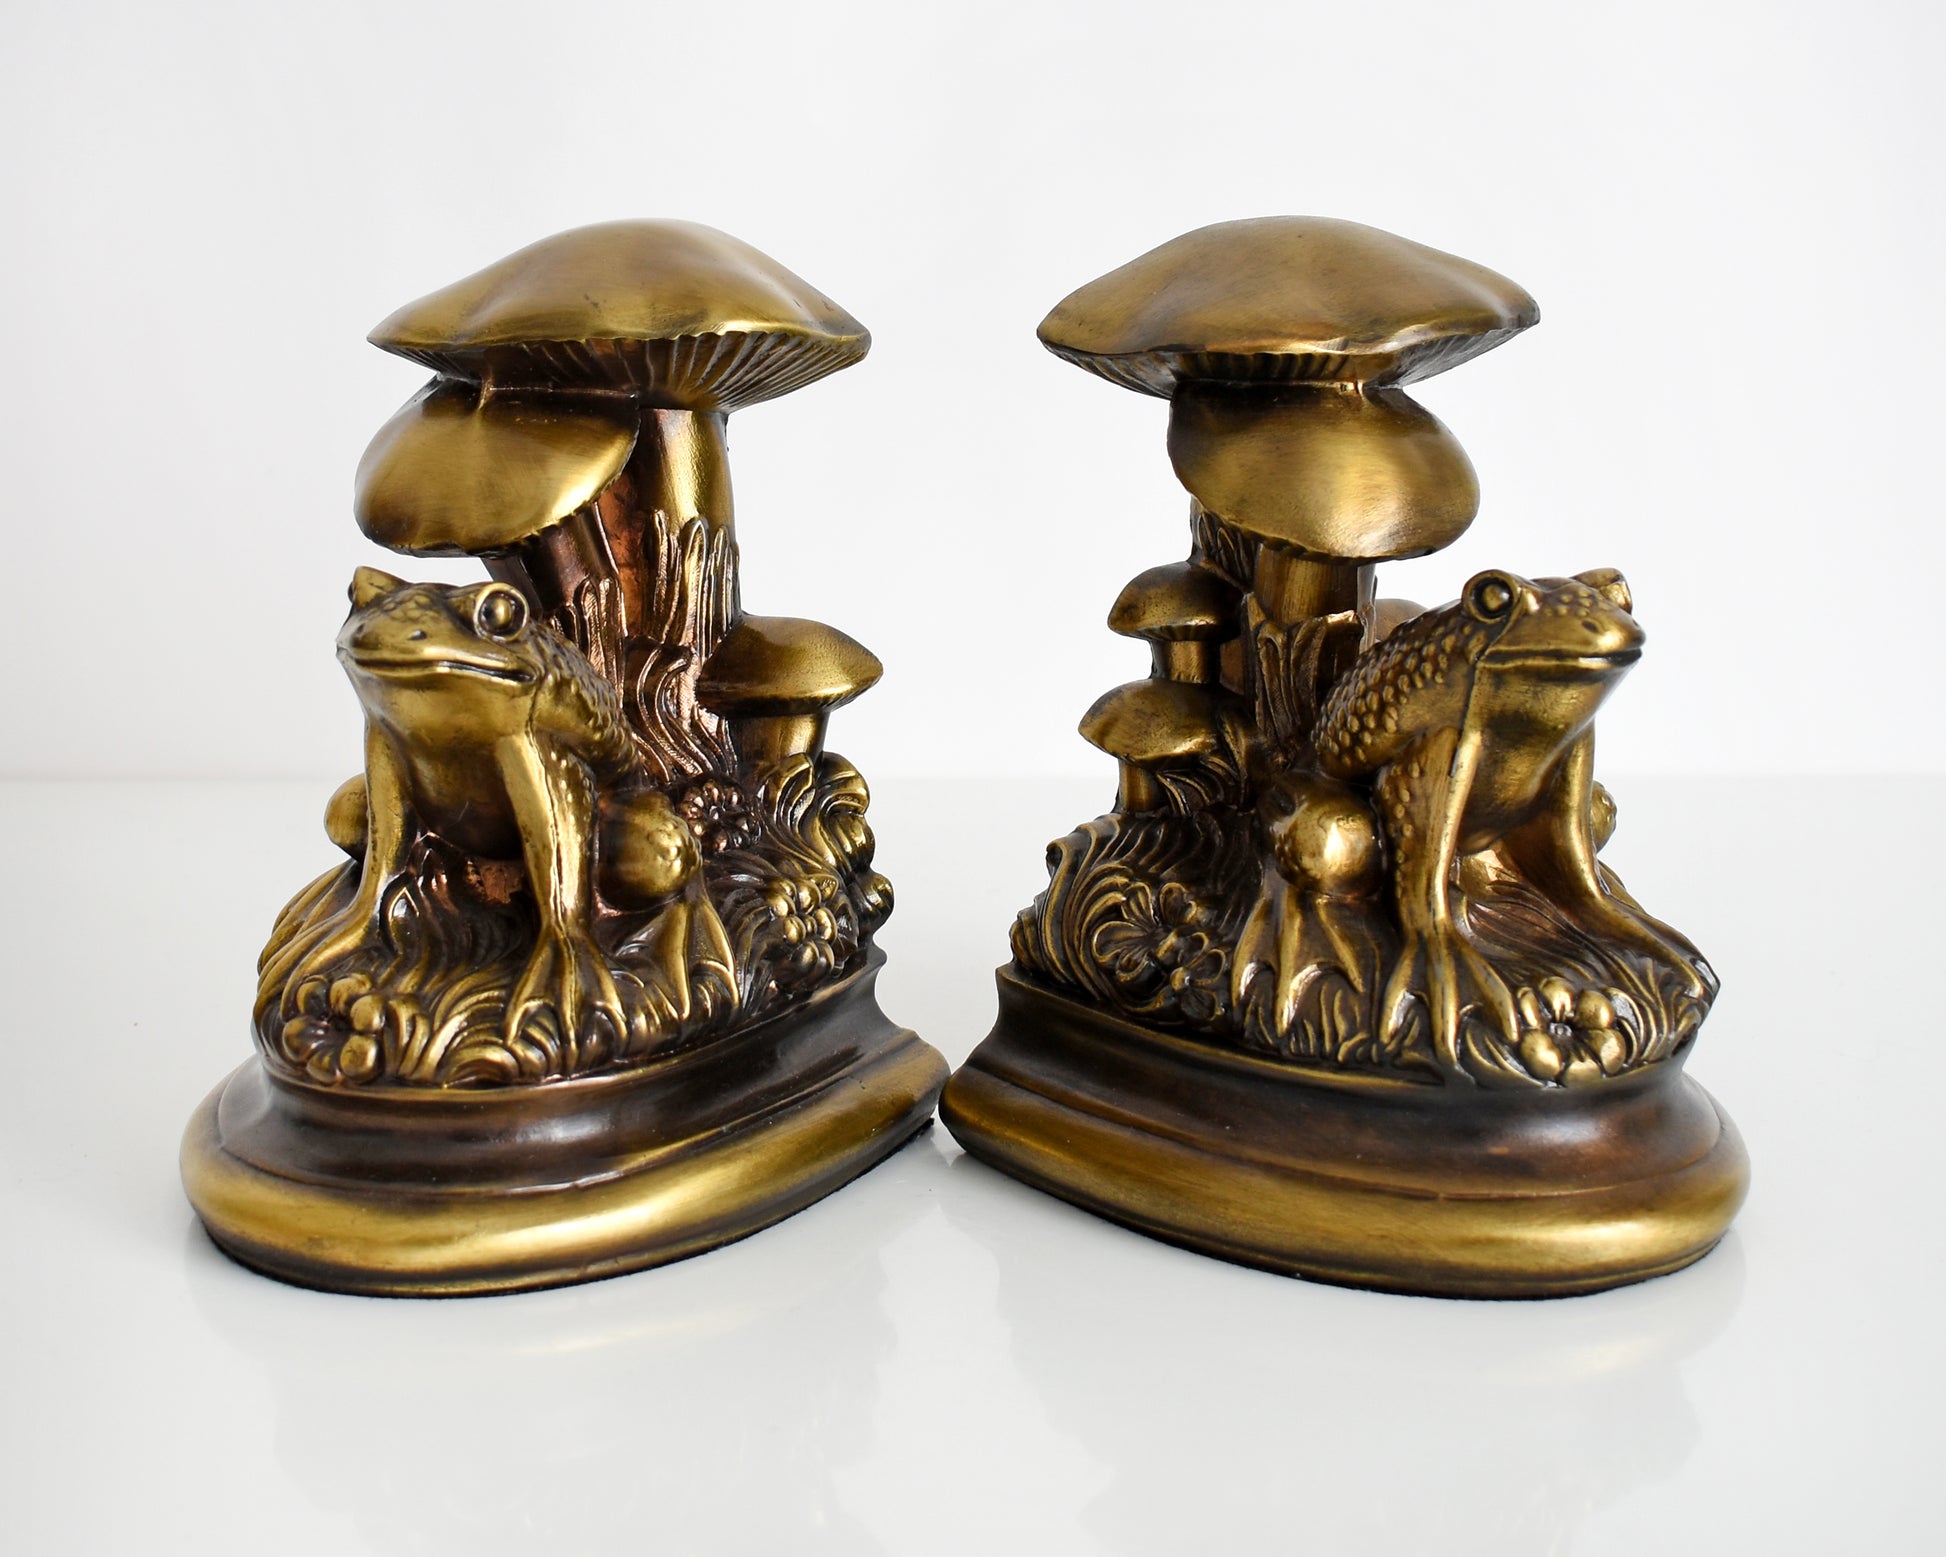 A pair of vintage brass frog and mushroom bookends